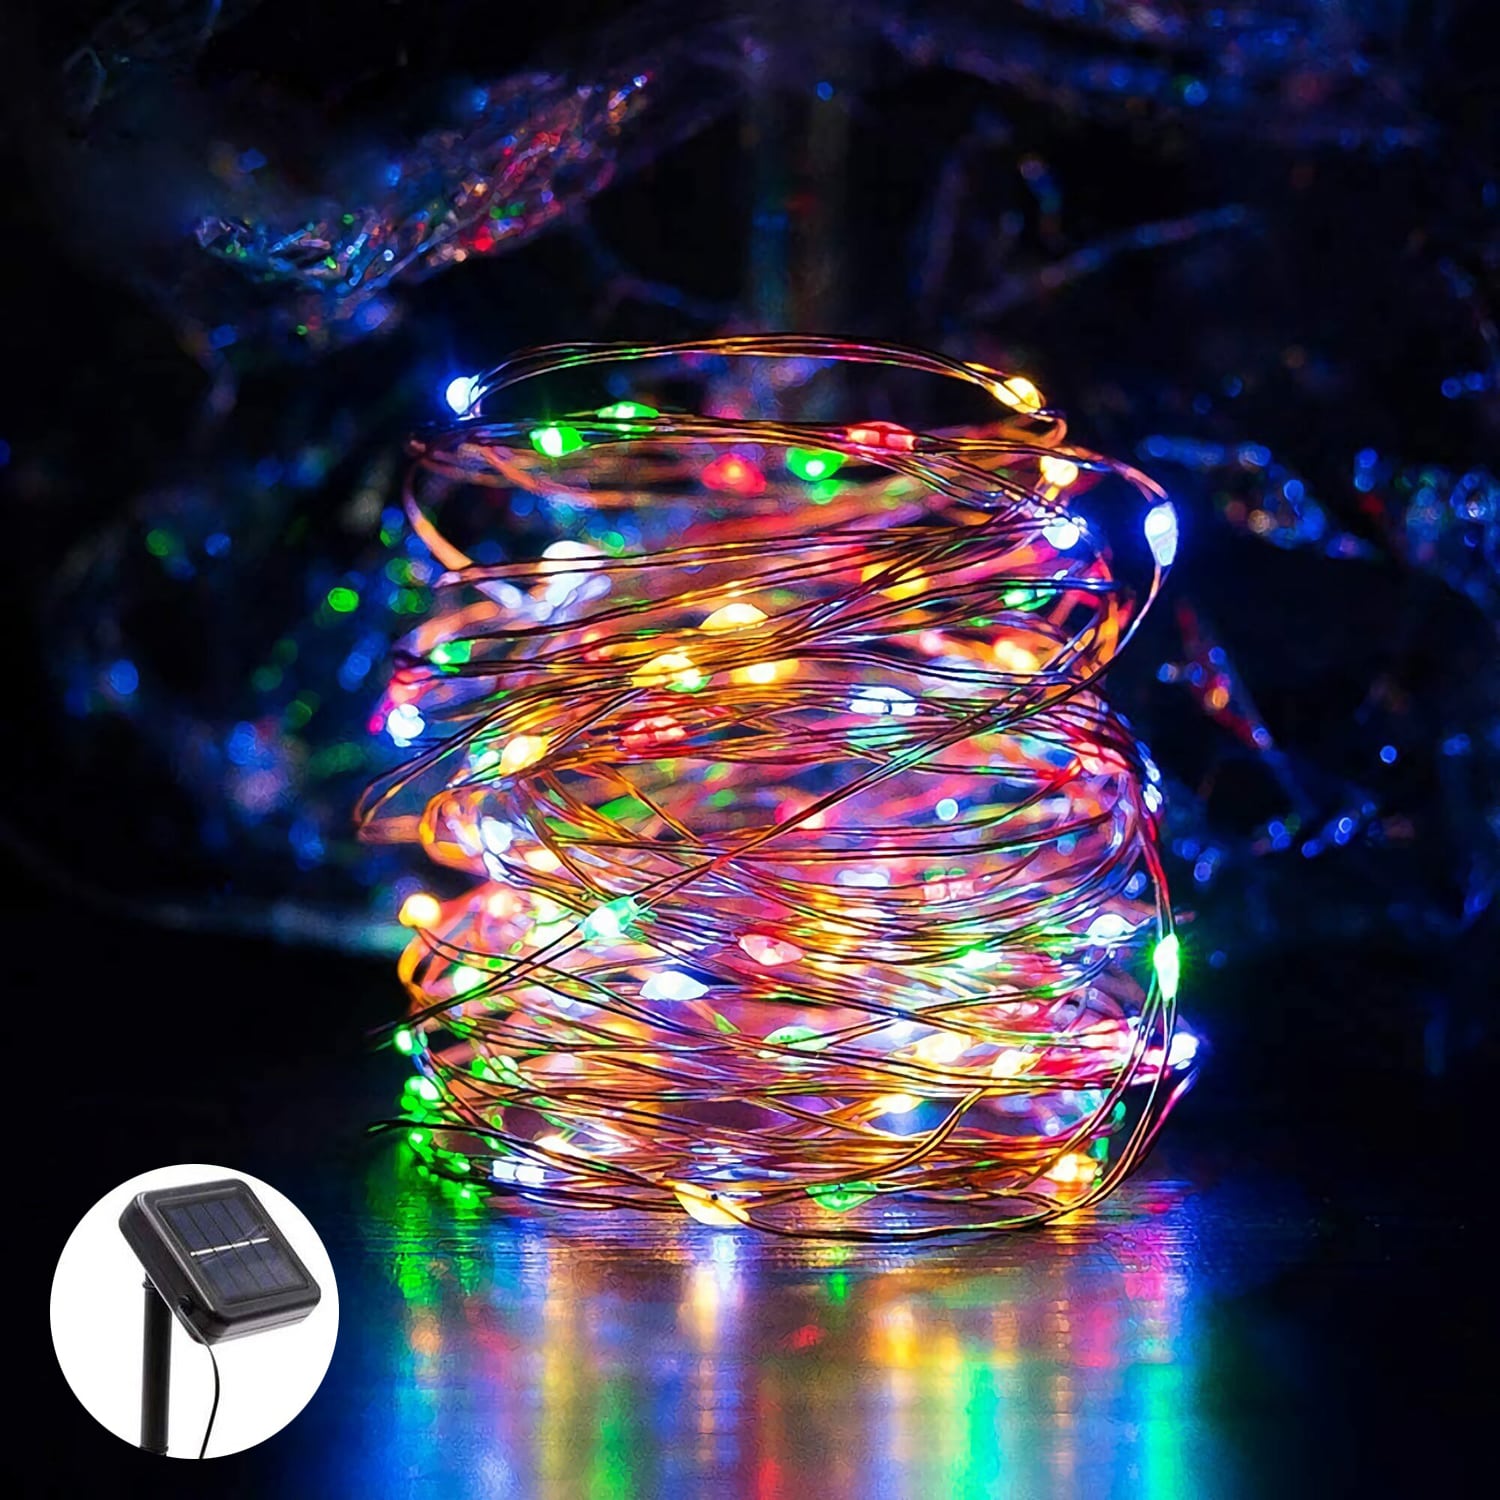 Multi-Color Solar Rope String Lights Waterproof 33ft 100 LED Copper Wire Outdoor Fairy String Light Solar Powered Christmas Decoration light Ambiance Lighting for Halloween Patio Garden Party Wedding 